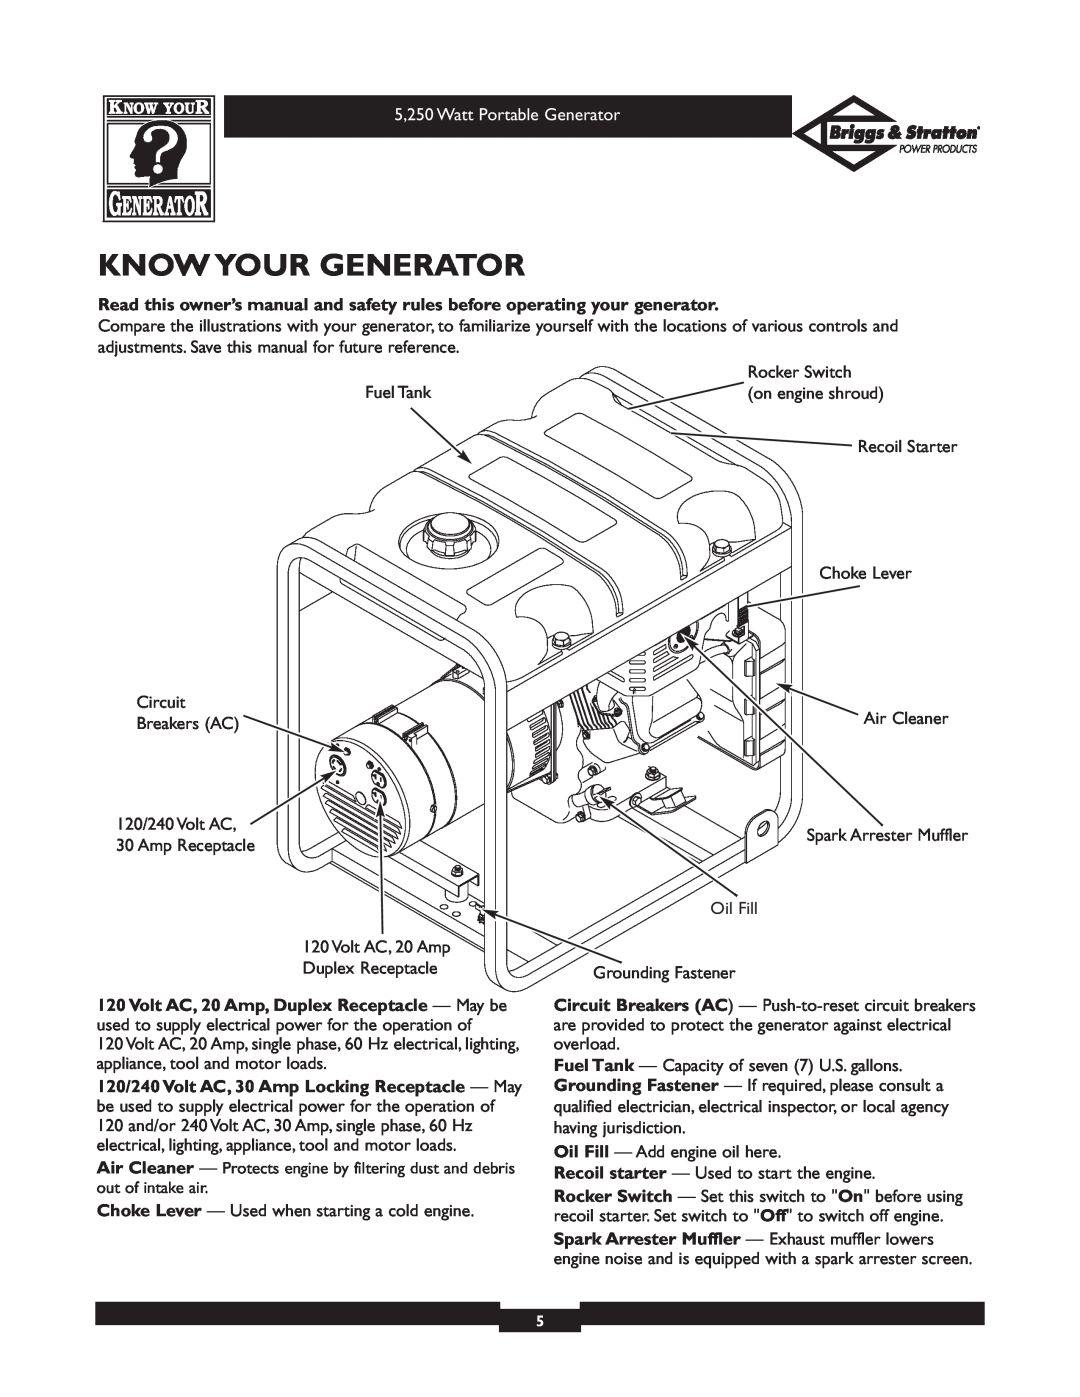 Briggs & Stratton 30204 owner manual Know Your Generator 